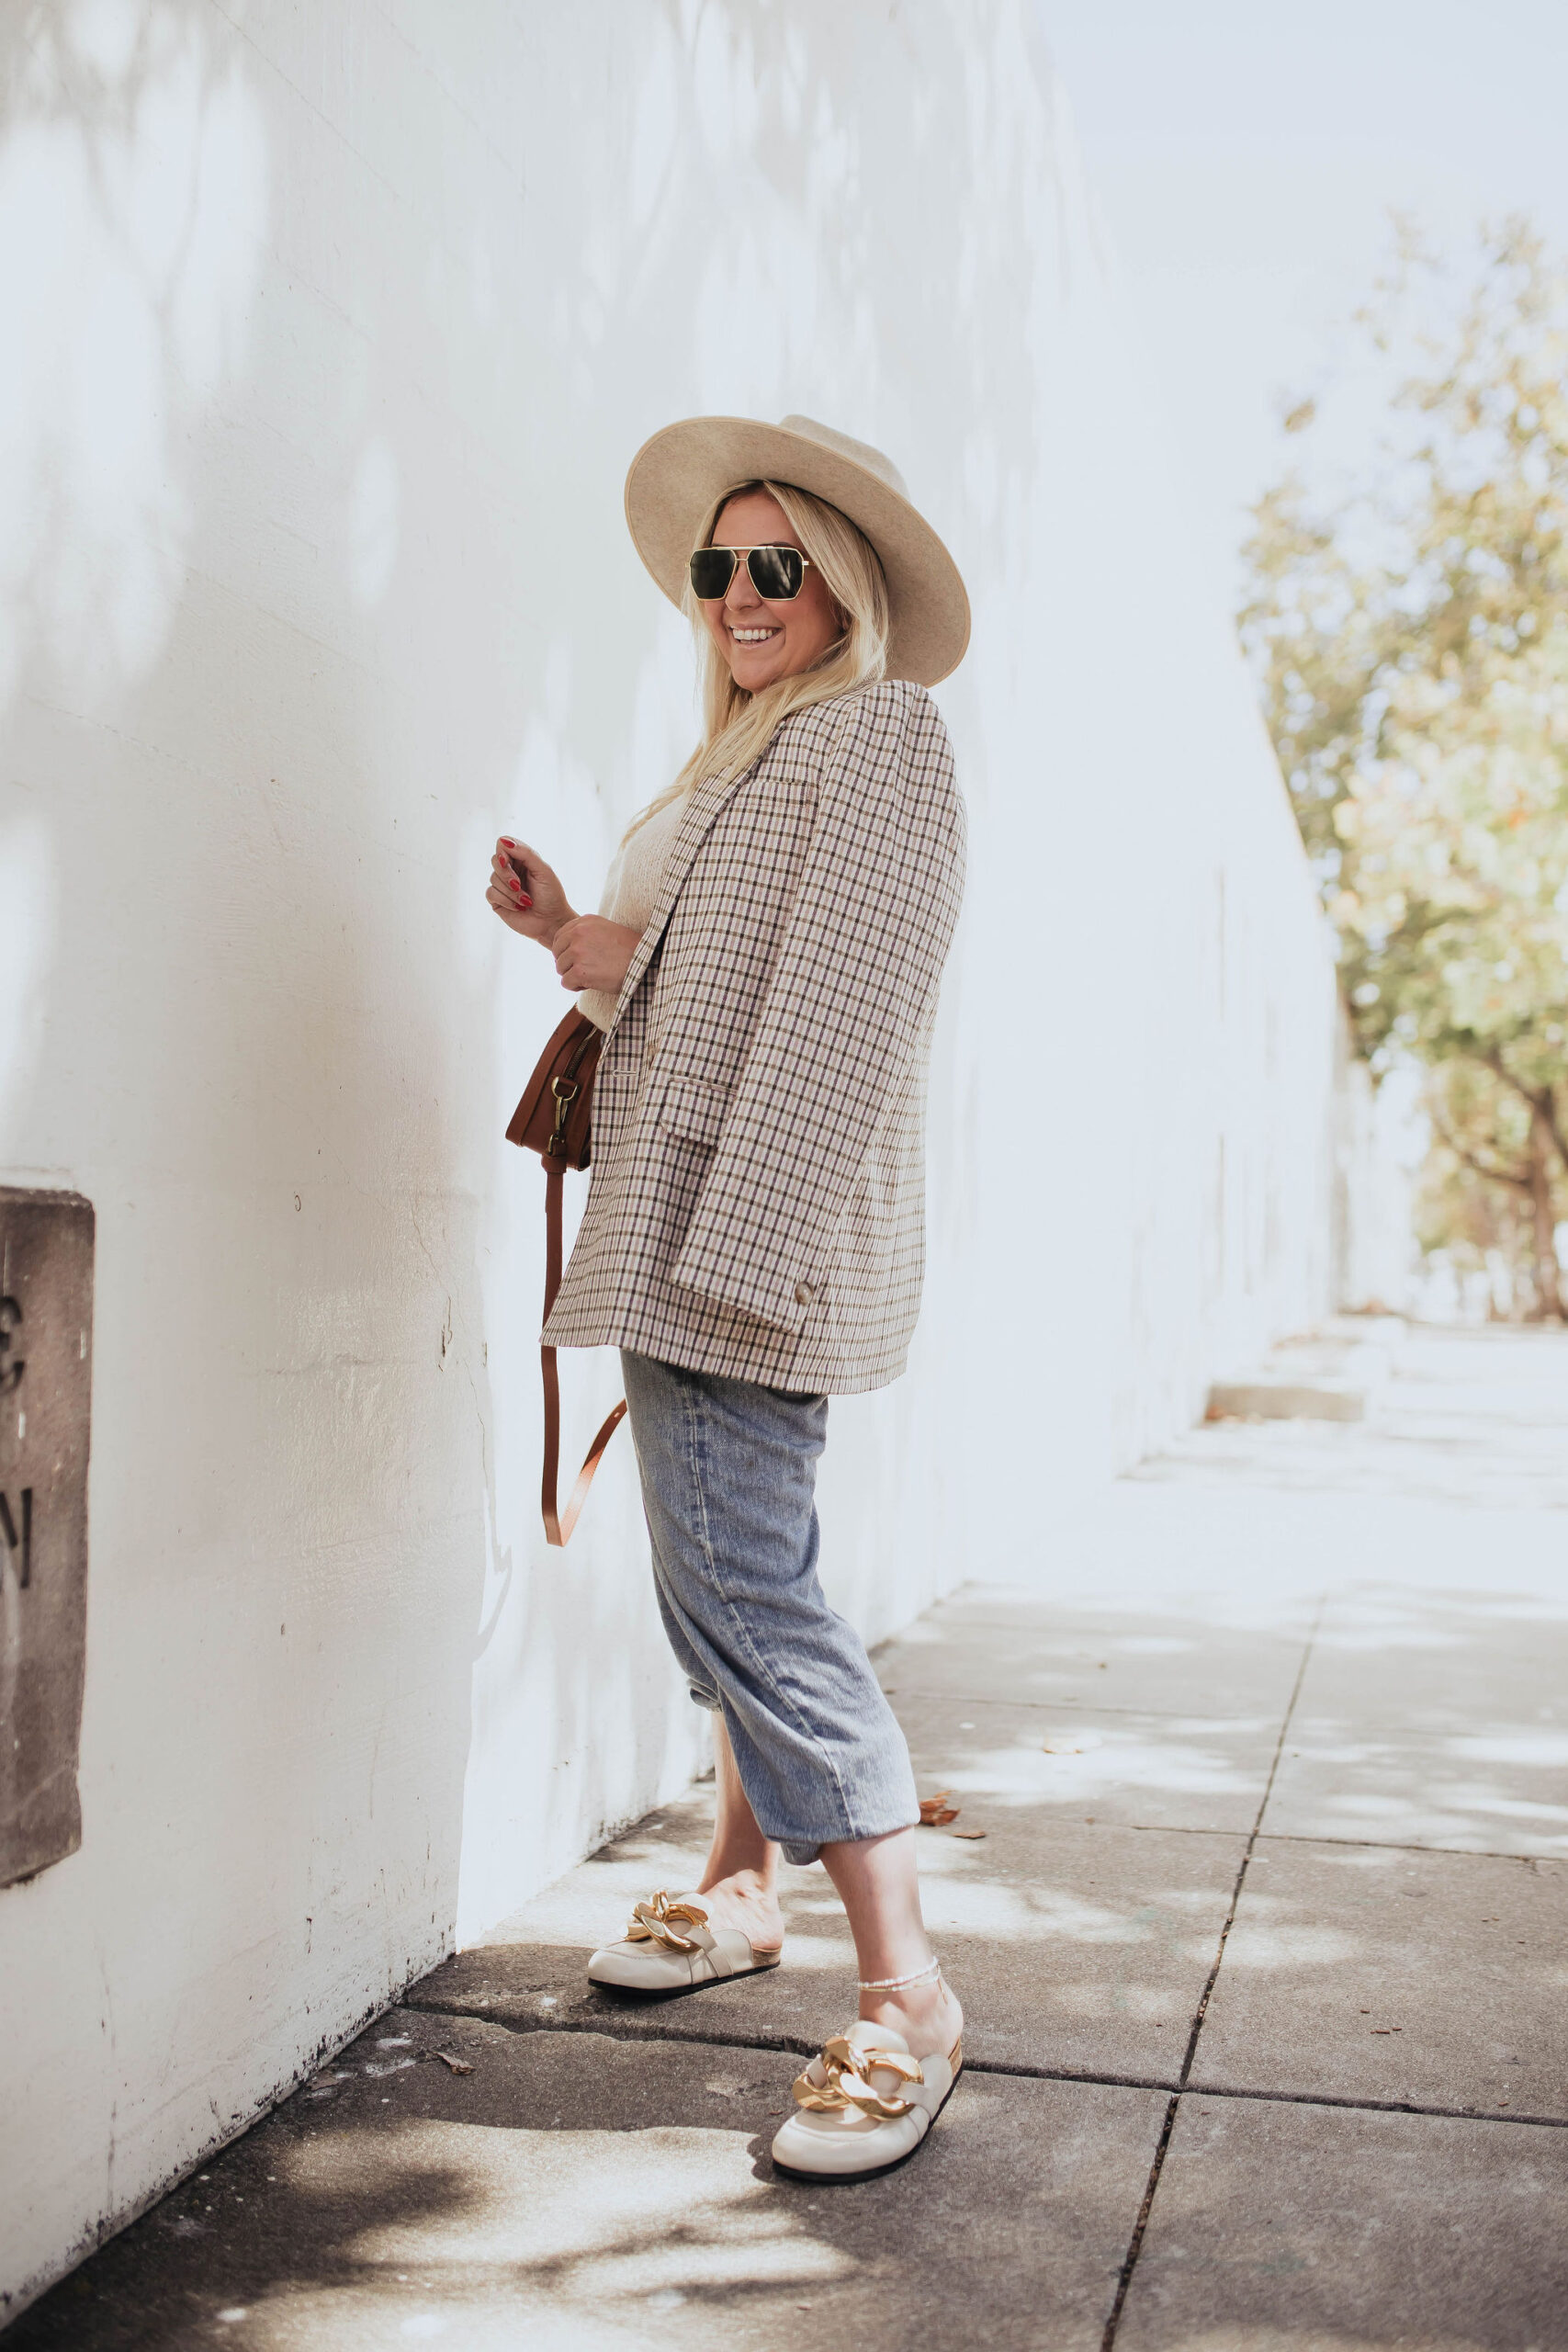 San Francisco fashion blogger KatWalkSF wears a Madewell blazer, sweater vest and leather bag with the Rag & Bone miramar jeans.